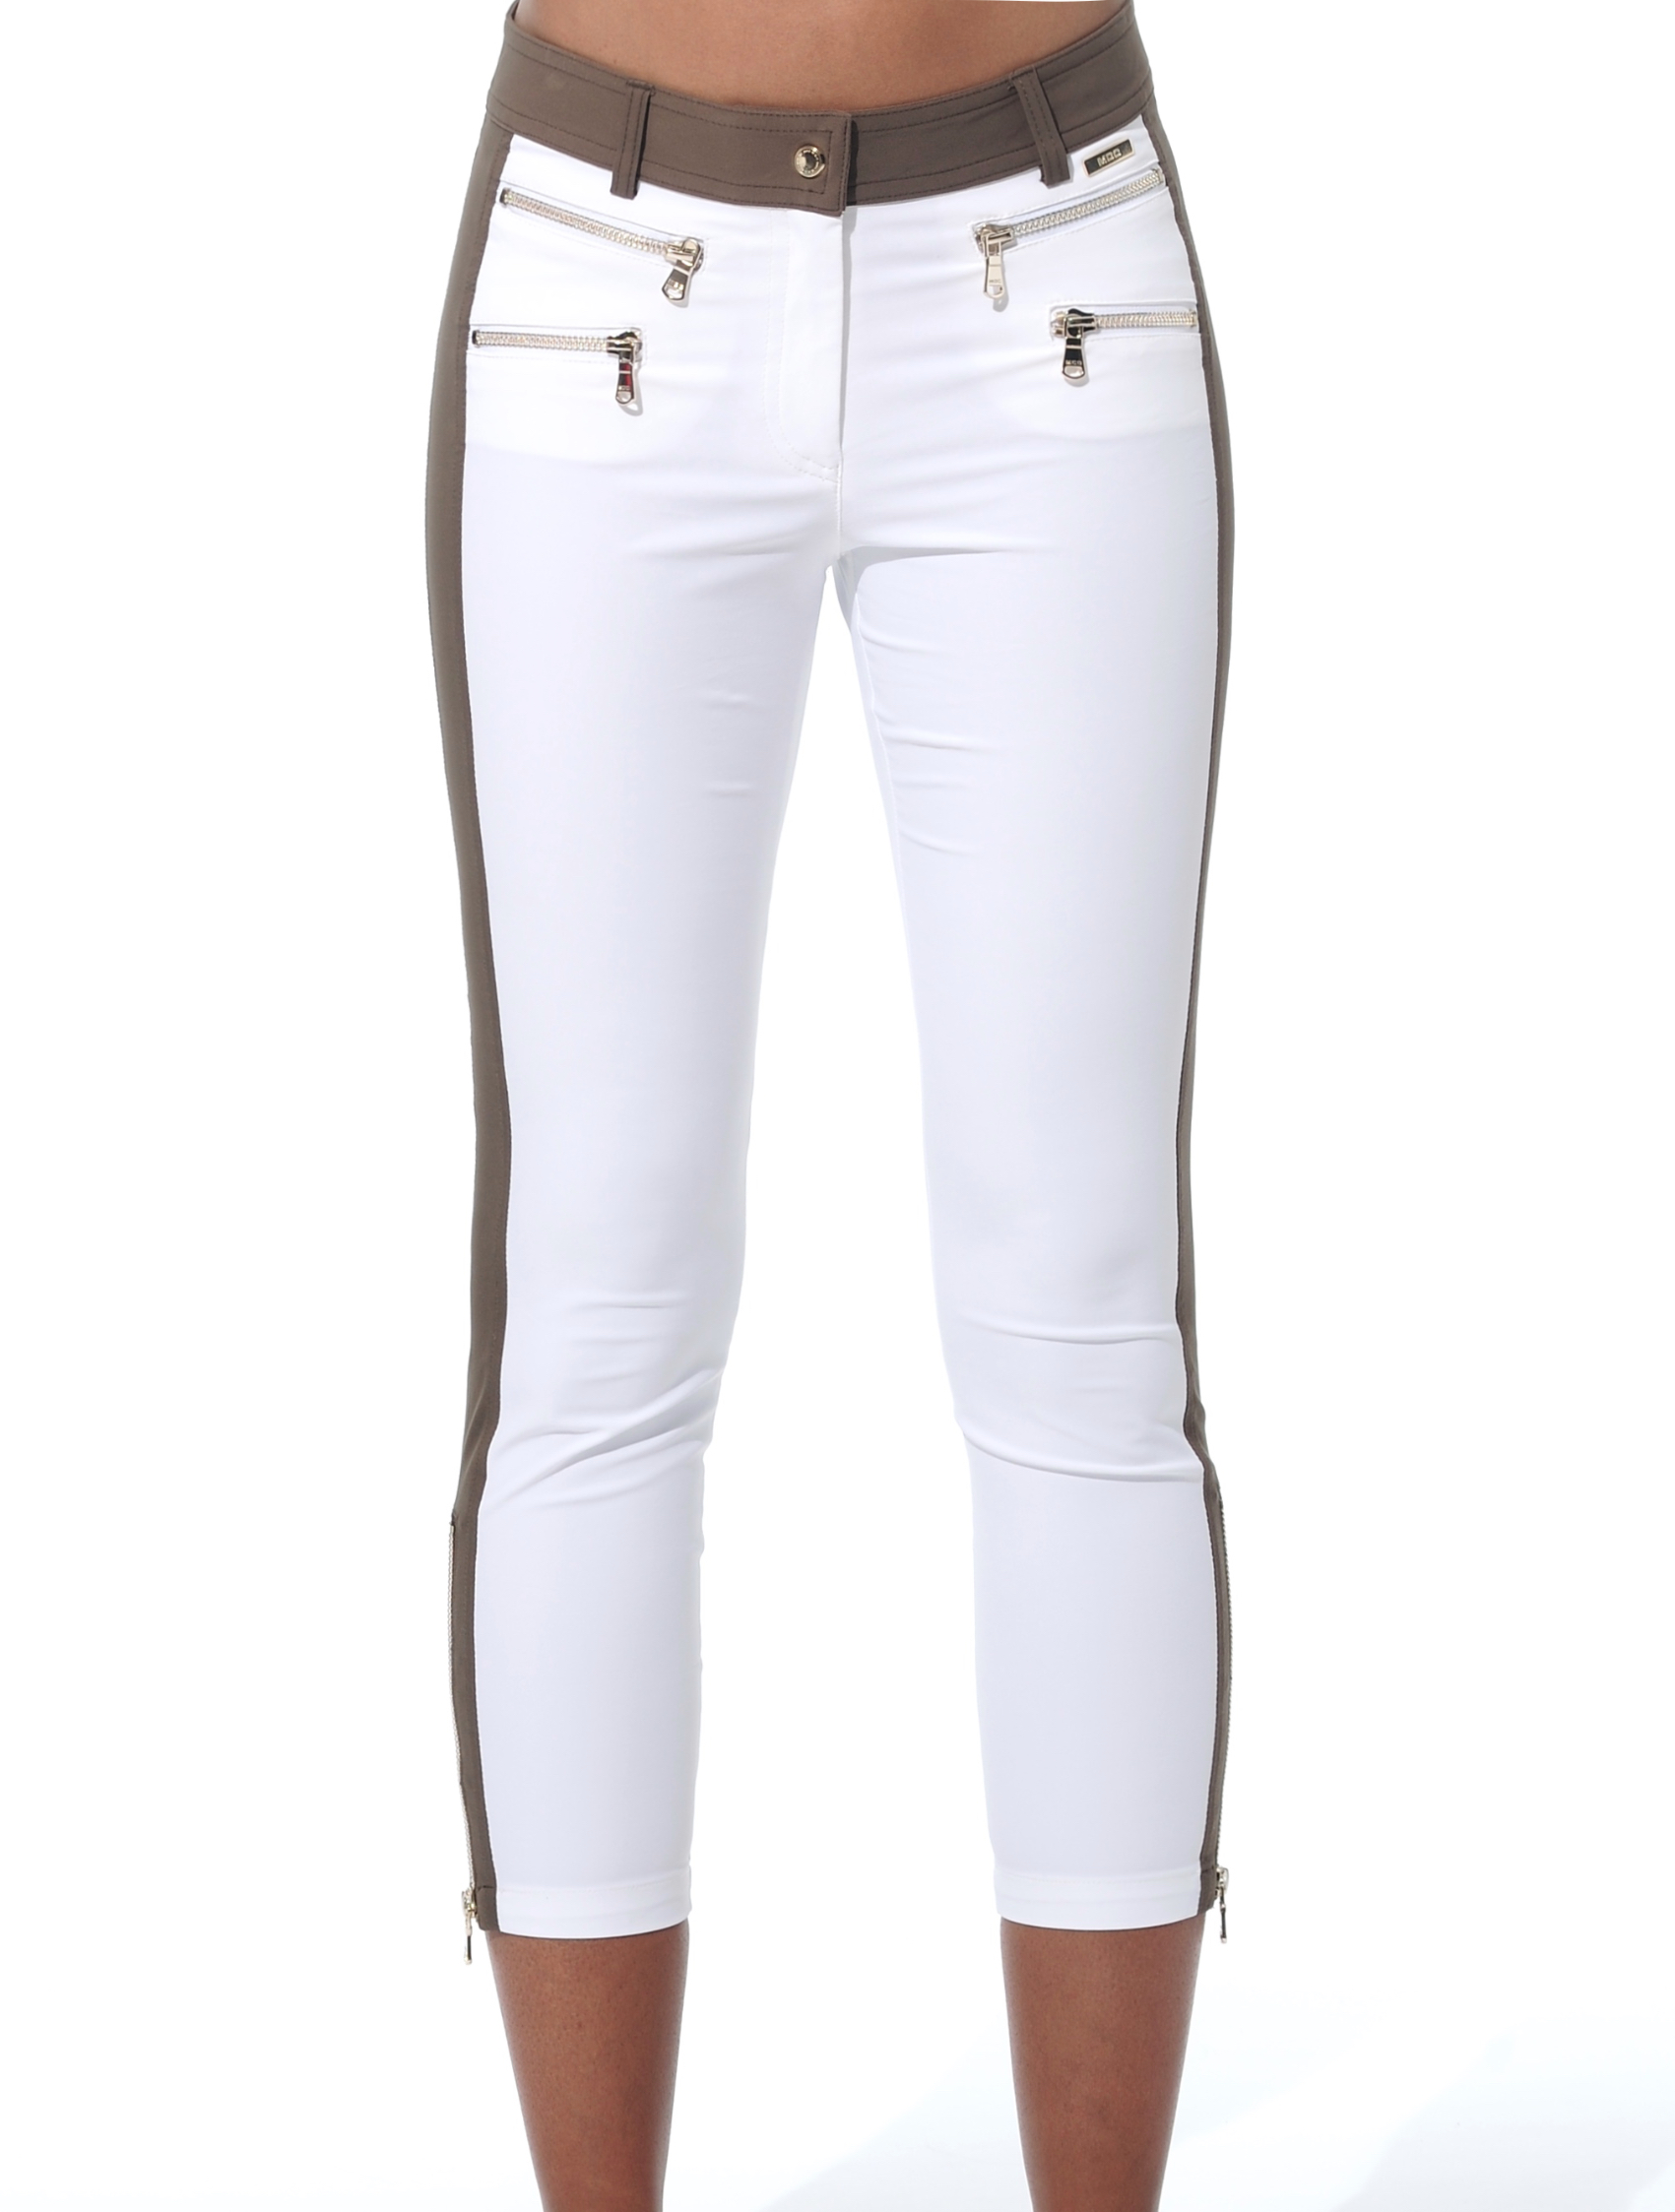 4way stretch double zip cropped pants white/chocolate 